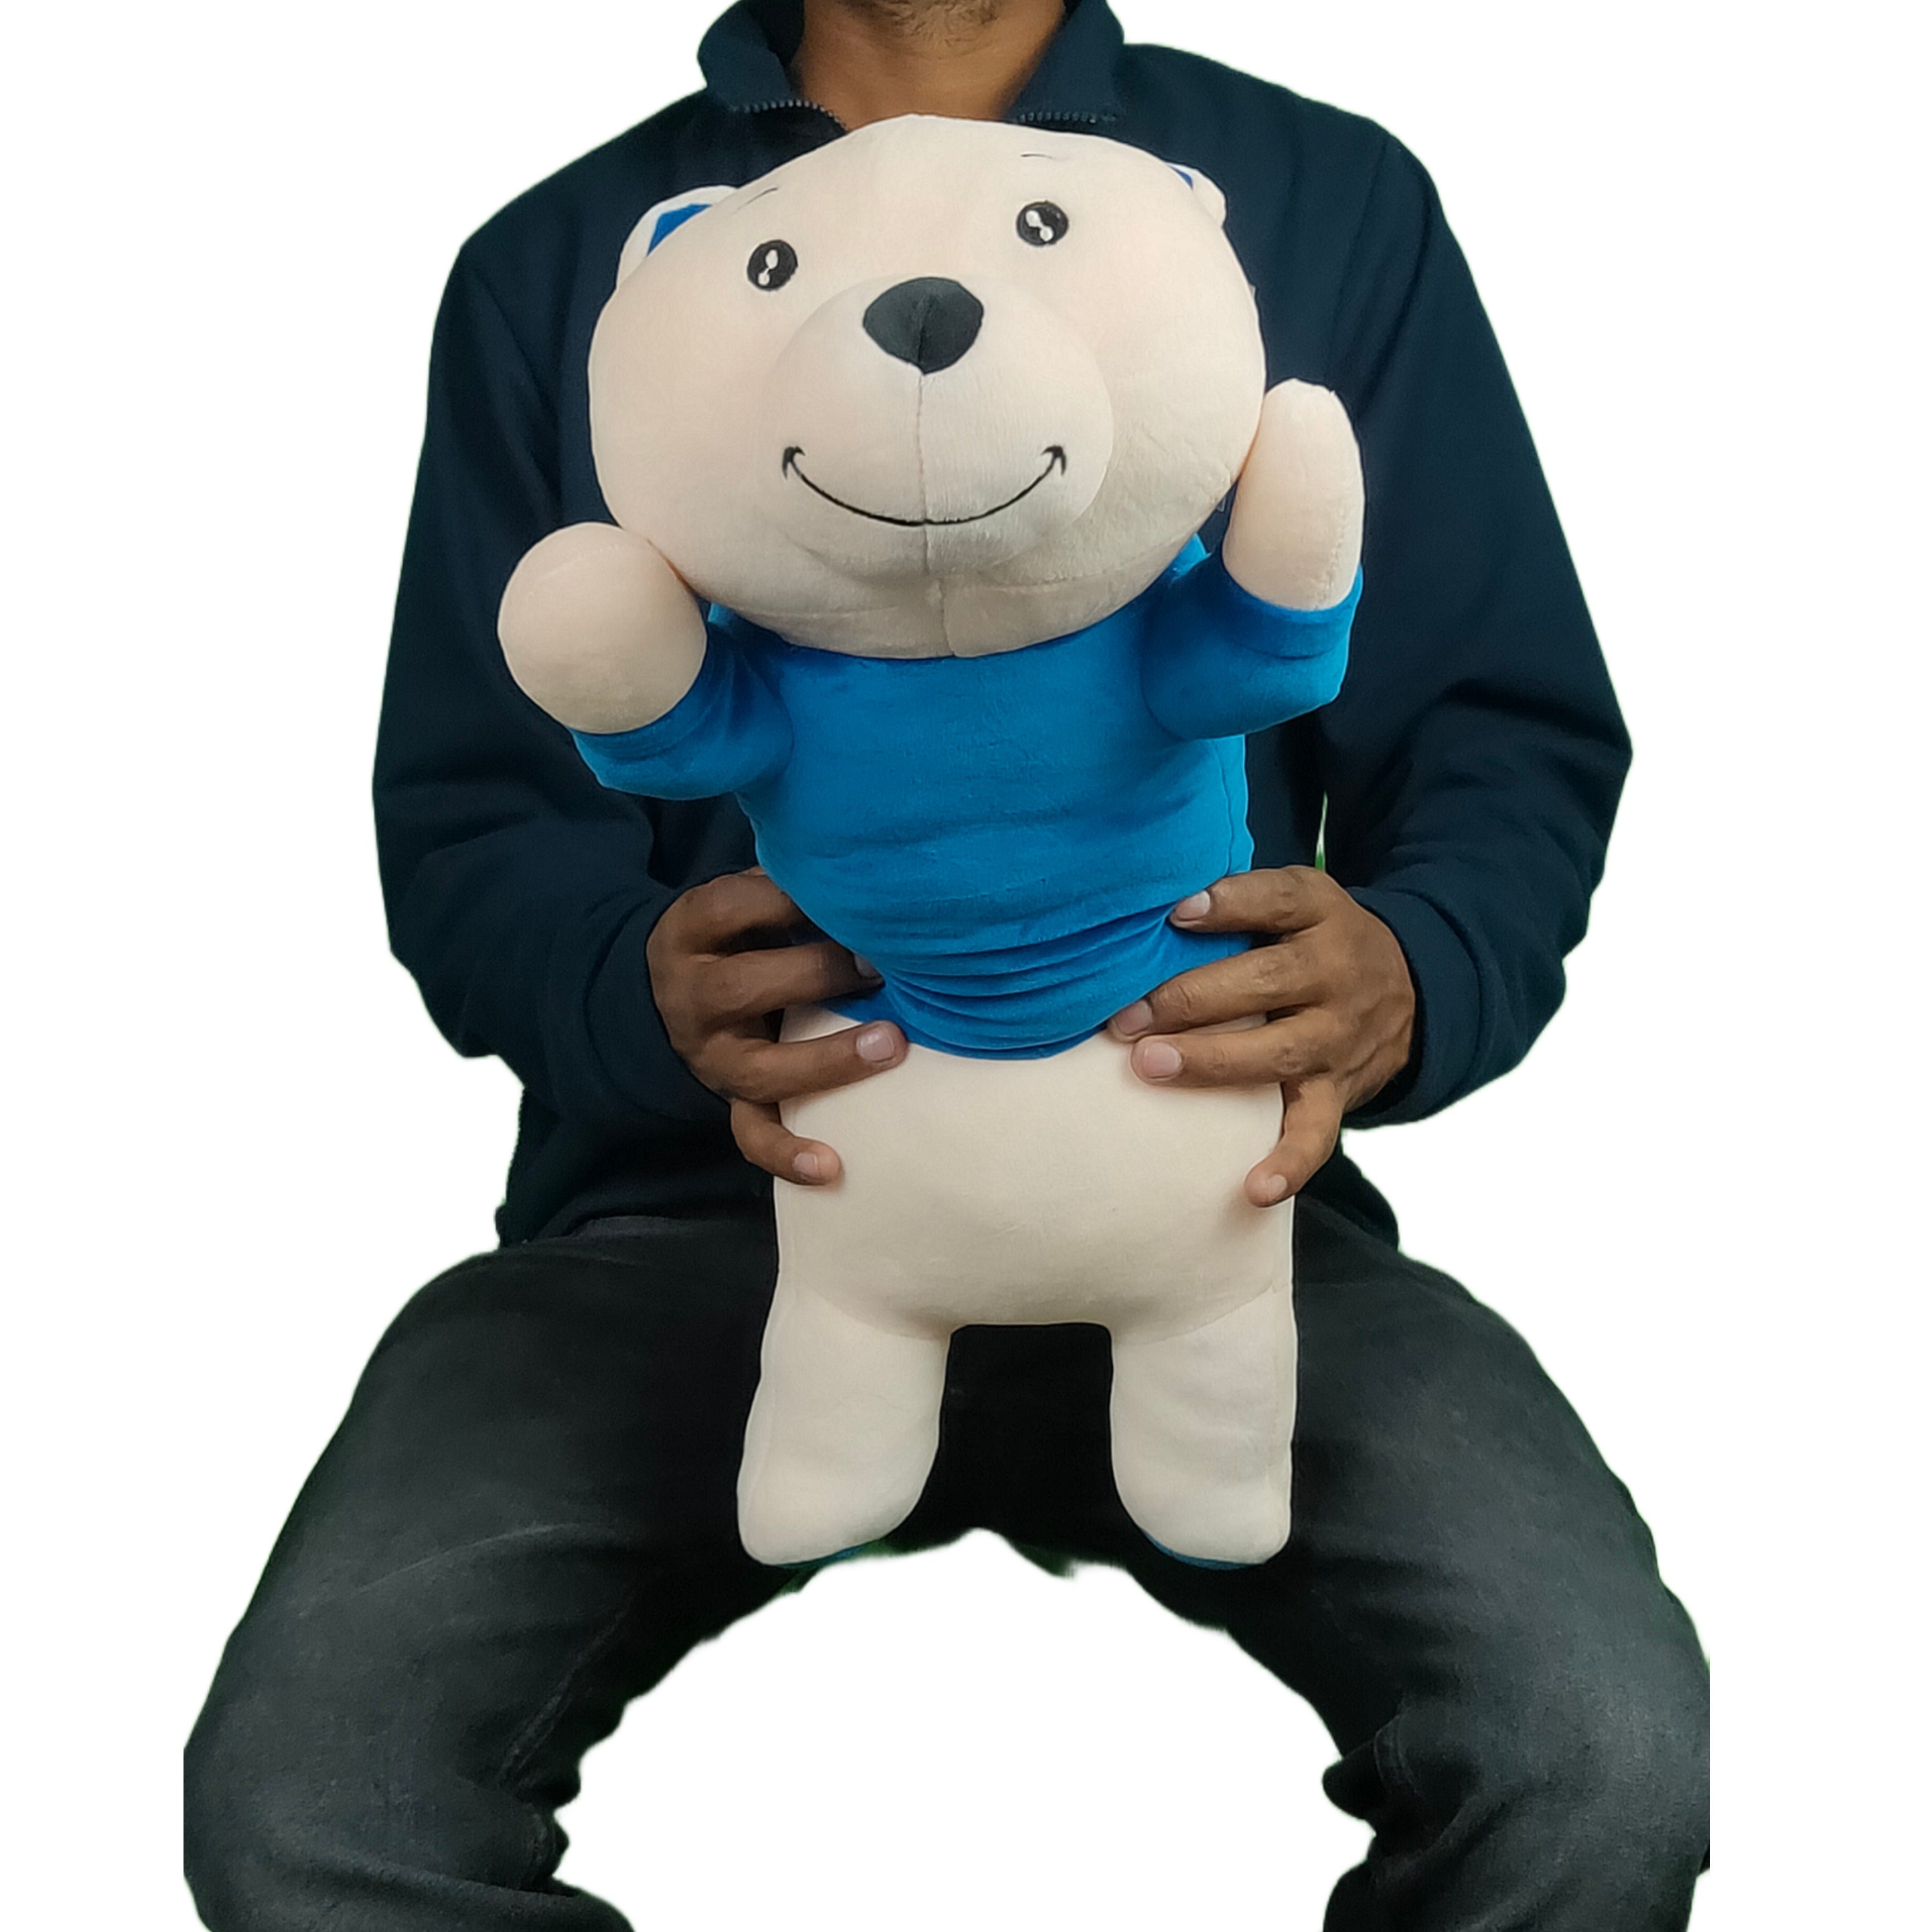 Play Hour Bogo Bear Pillow Plush Soft Toy with I Love You Text for Ages 5 Years and Up - Blue, 60cm